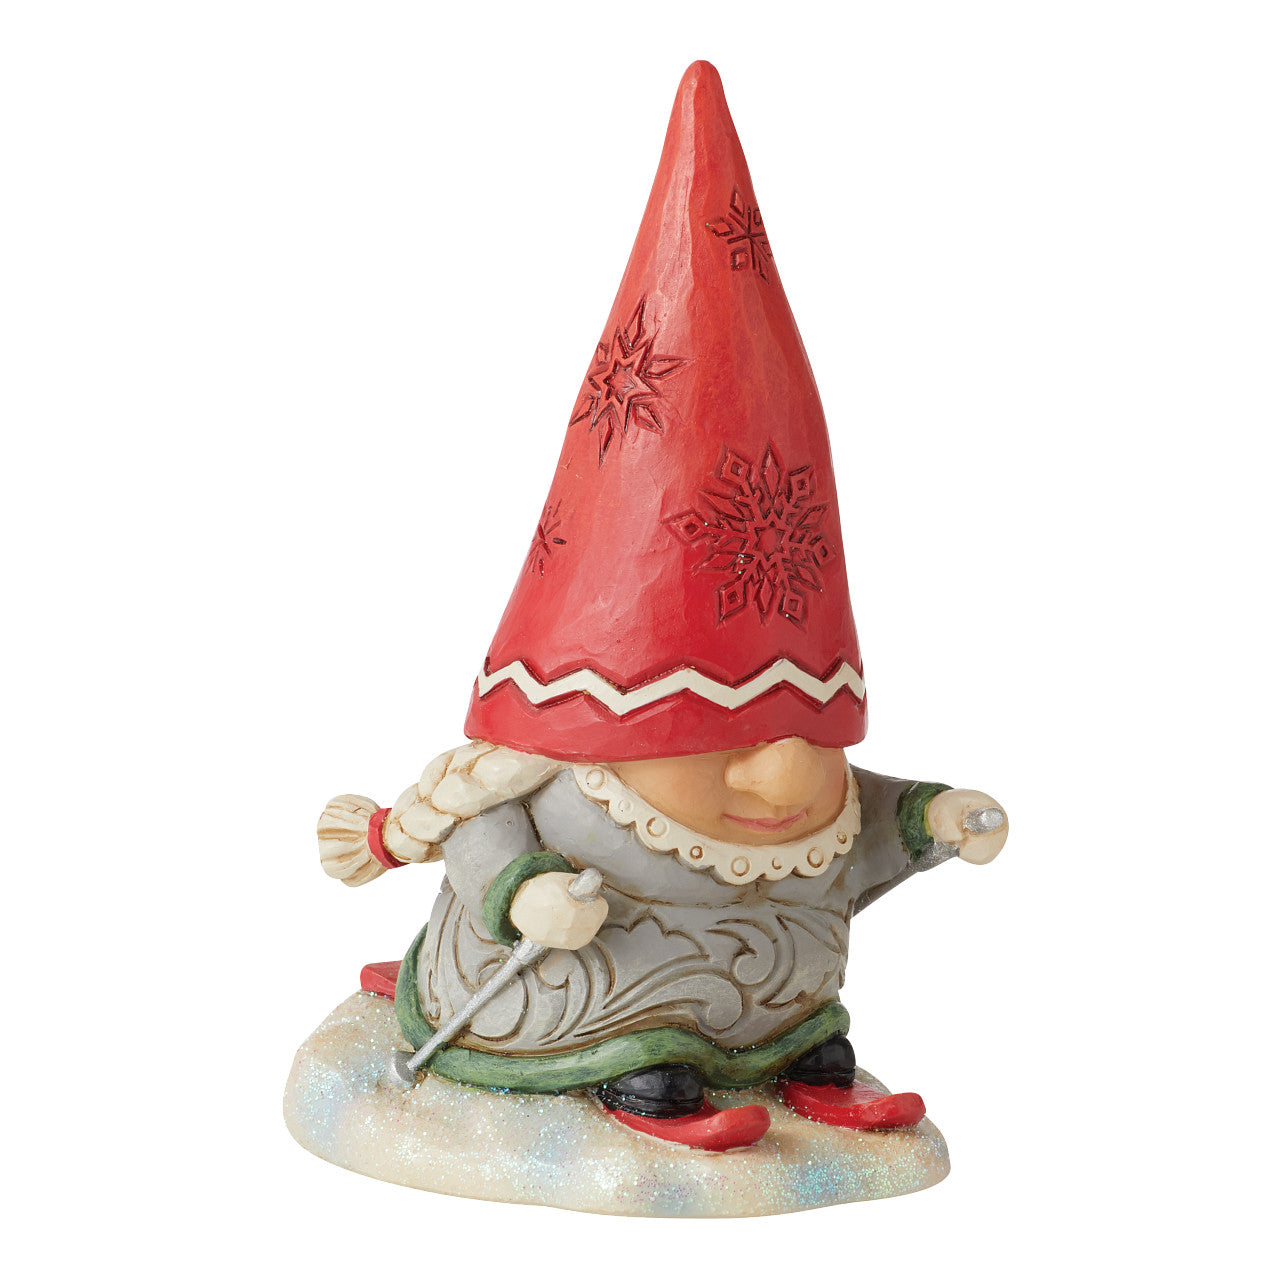 Gnome on the Slopes - Gnome With Braids Skiing Figurine